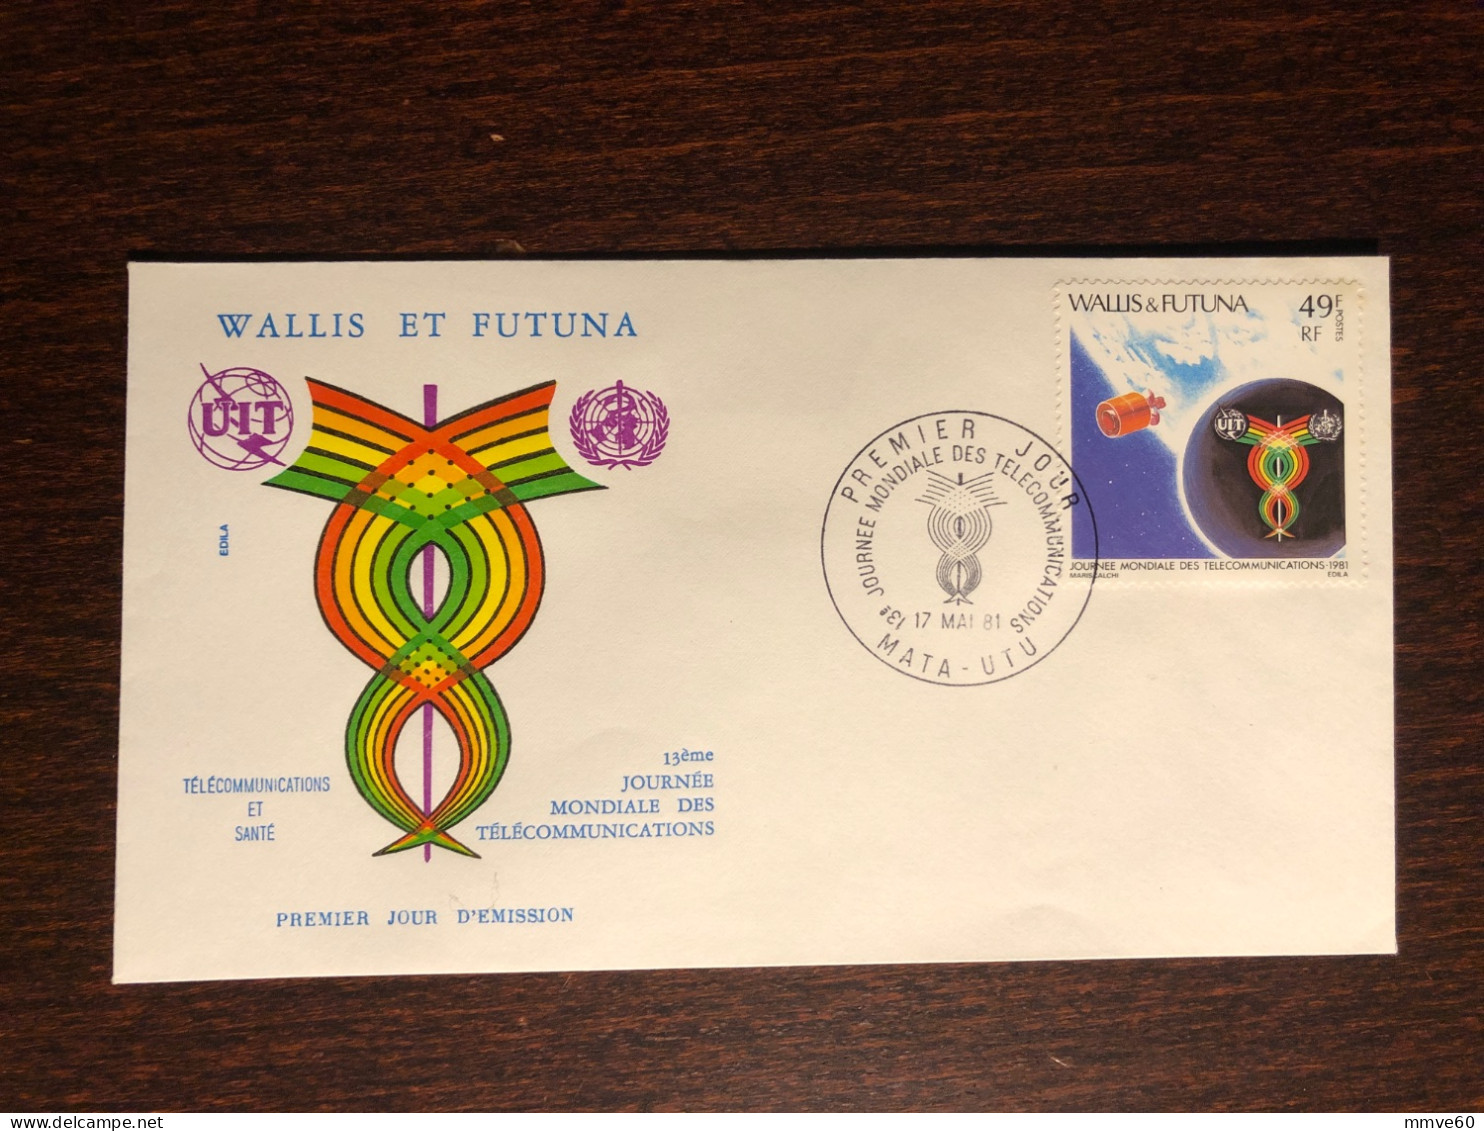 WALLIS & FUTUNA FDC COVER 1981 YEAR TELECOMMUNICATIONS & HEALTH MEDICINE STAMPS - Covers & Documents